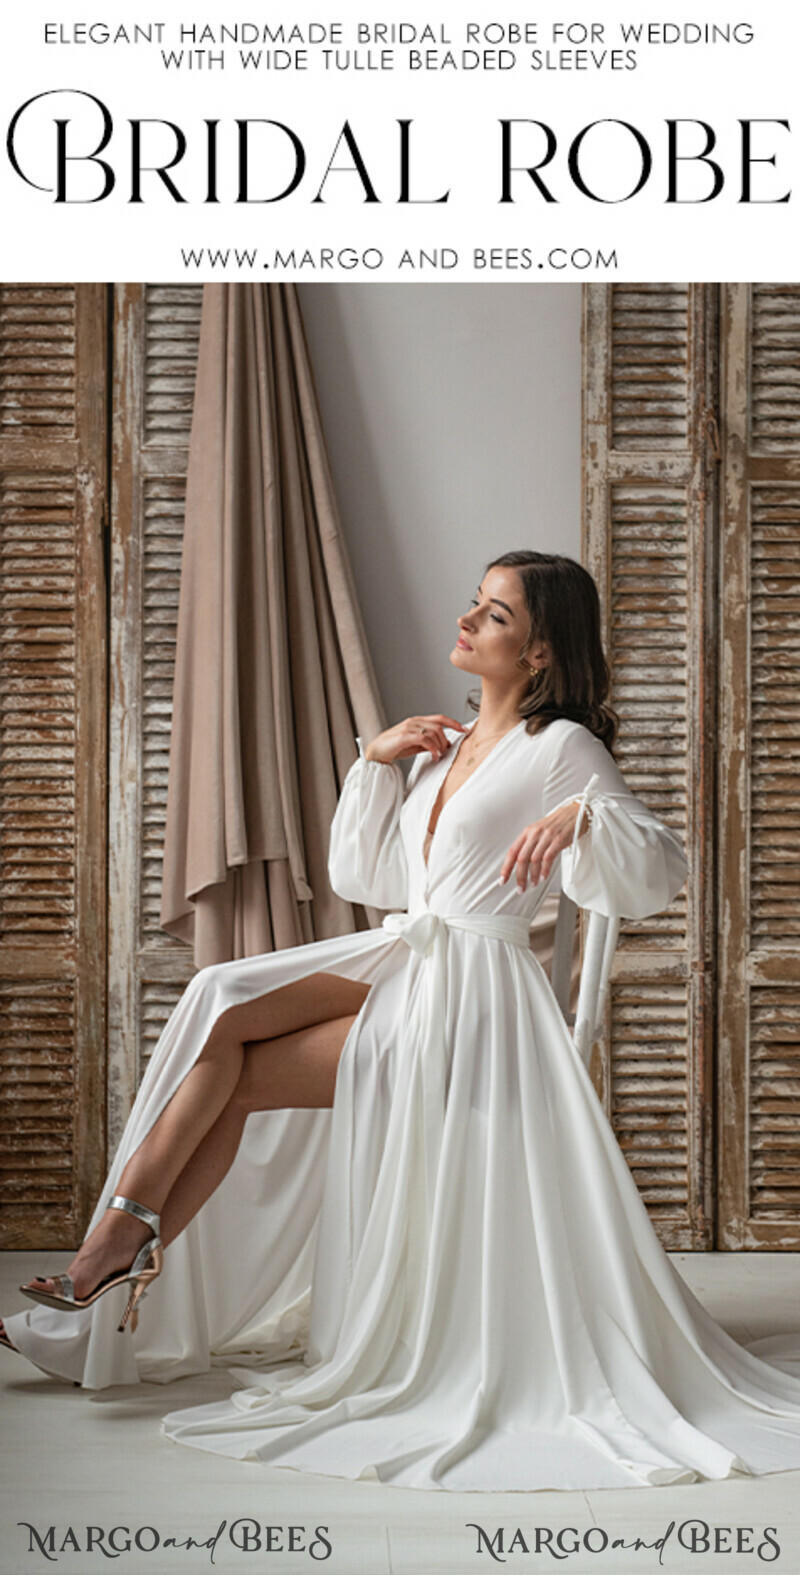 Long Bridal robe for wedding with Train, Robe wide sleeves, Silk Bride robe Long white robe silky boudoir robe Dressing gown Bridesmaid gift-16